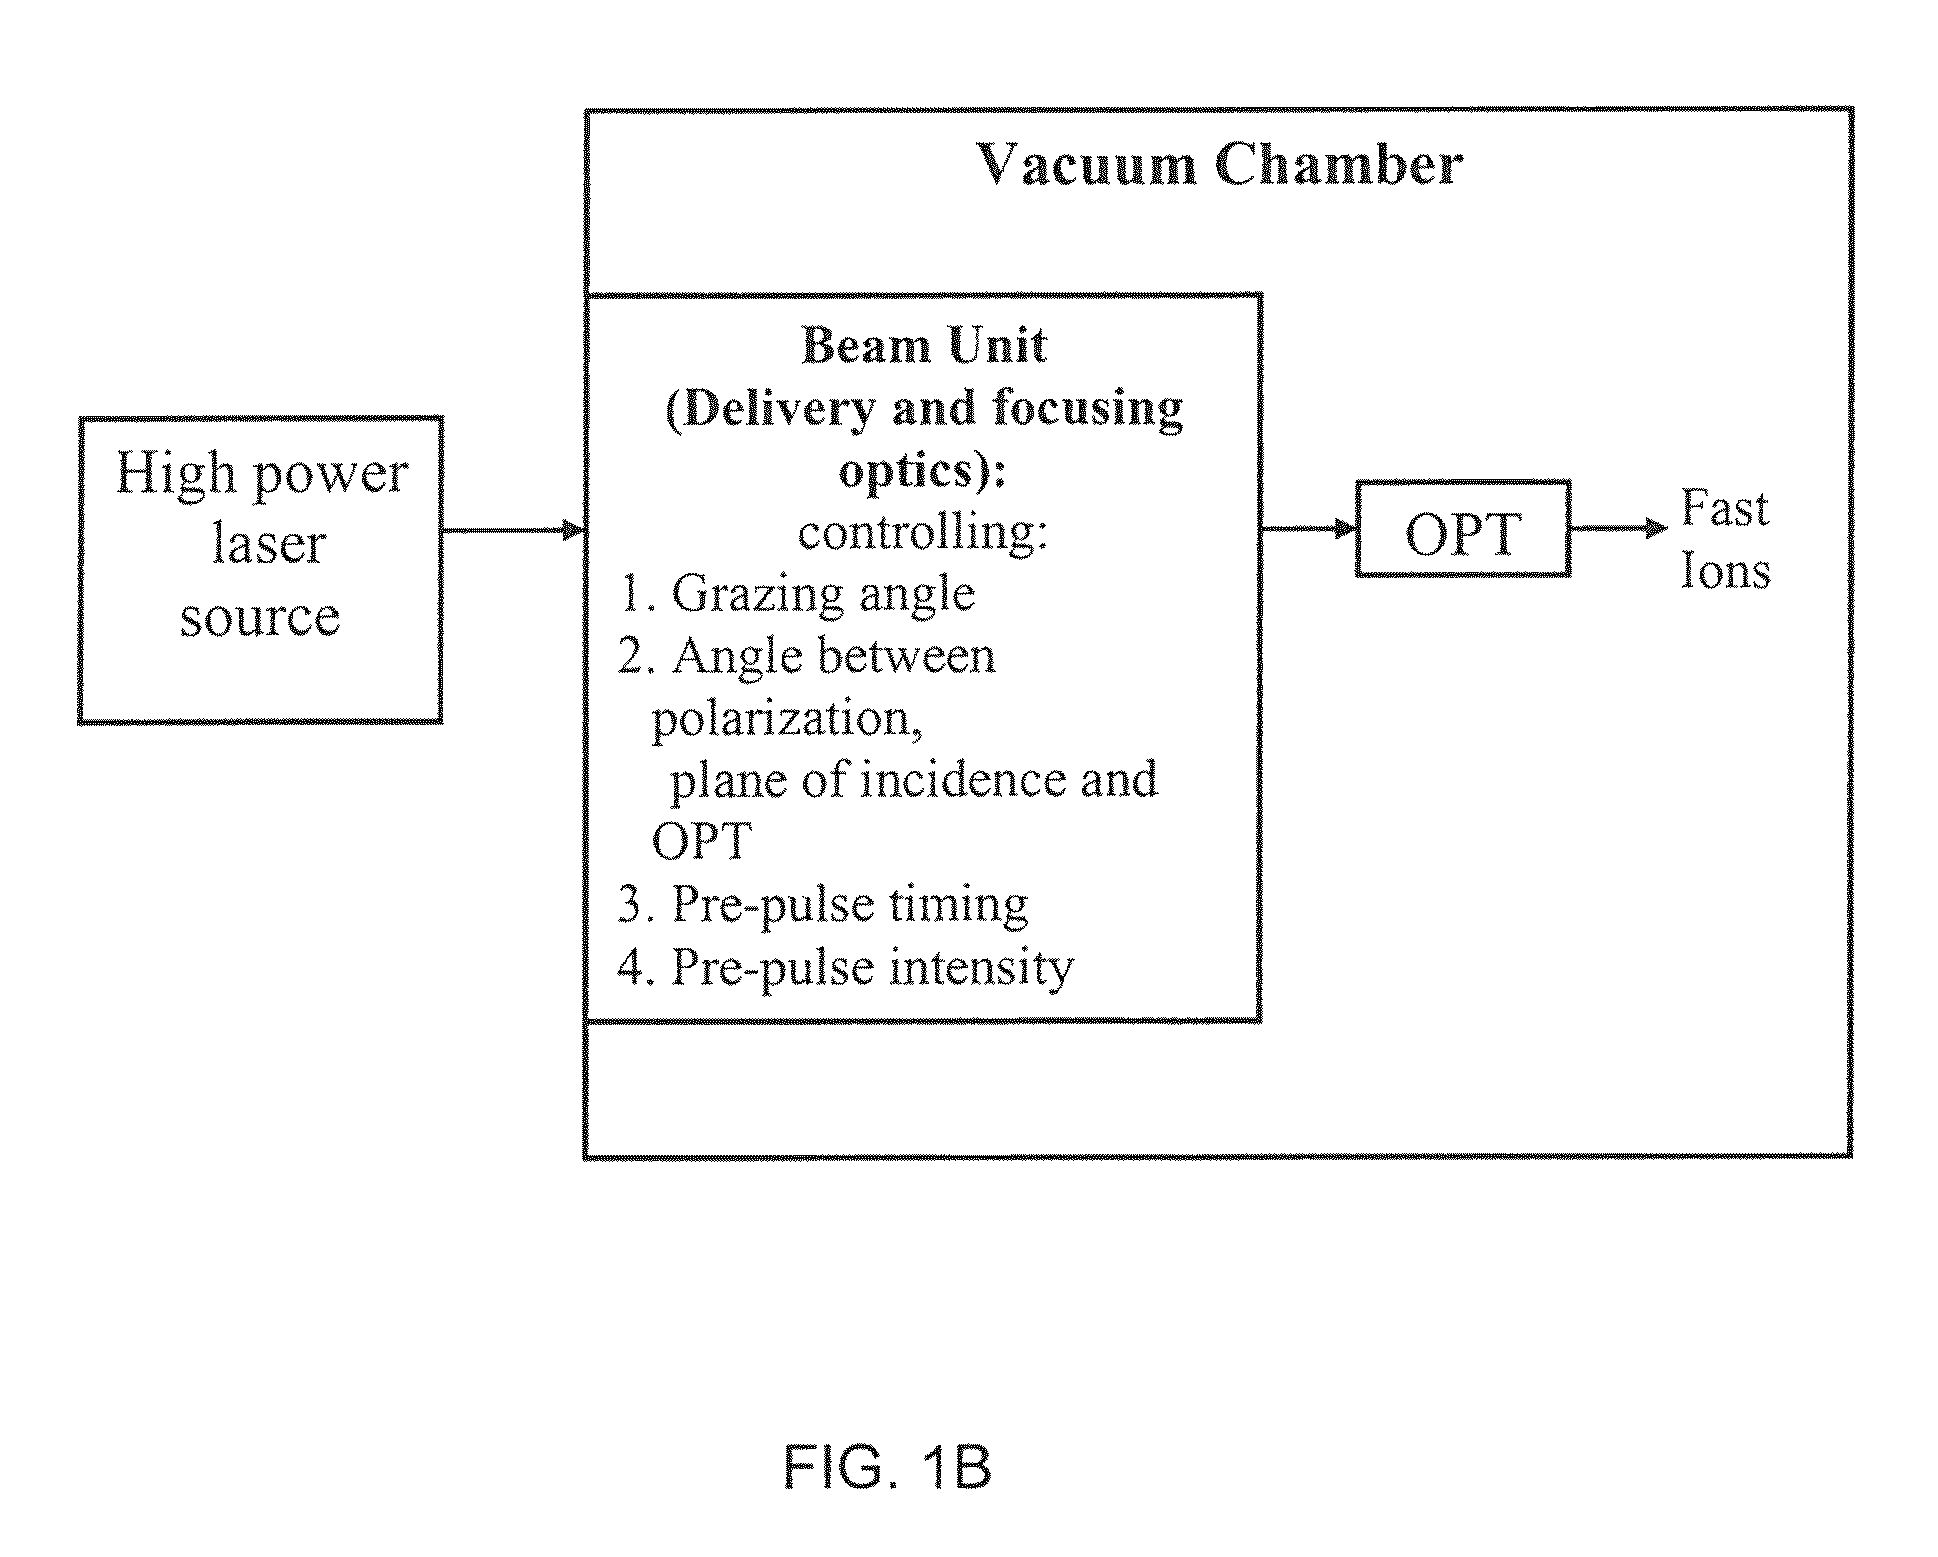 System for fast ions generation and a method thereof